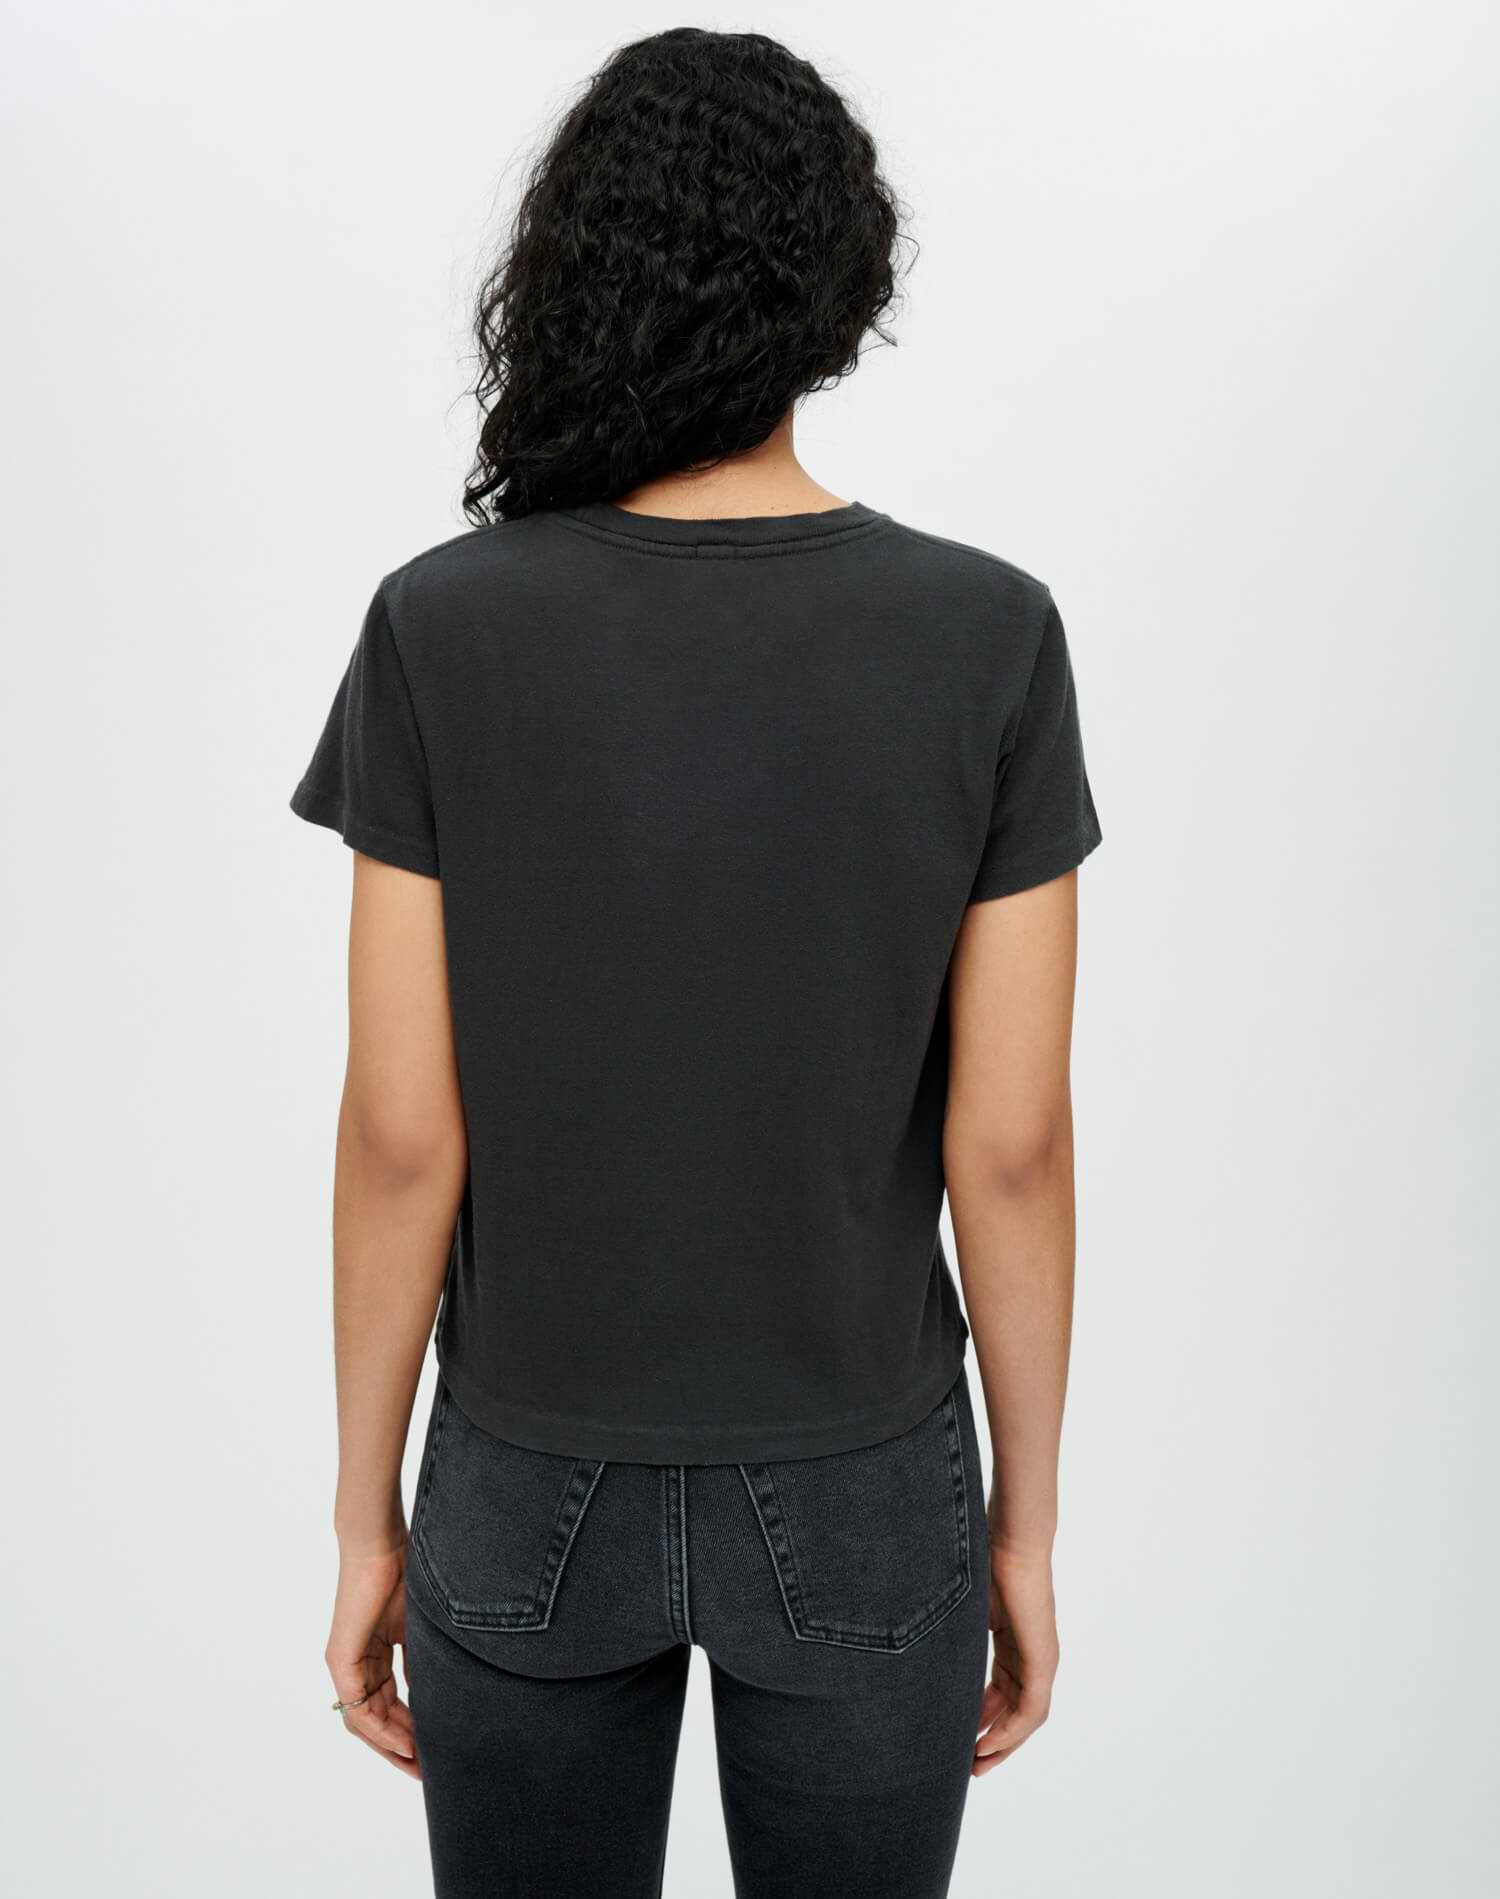 Hanes Classic Tee - Washed Black